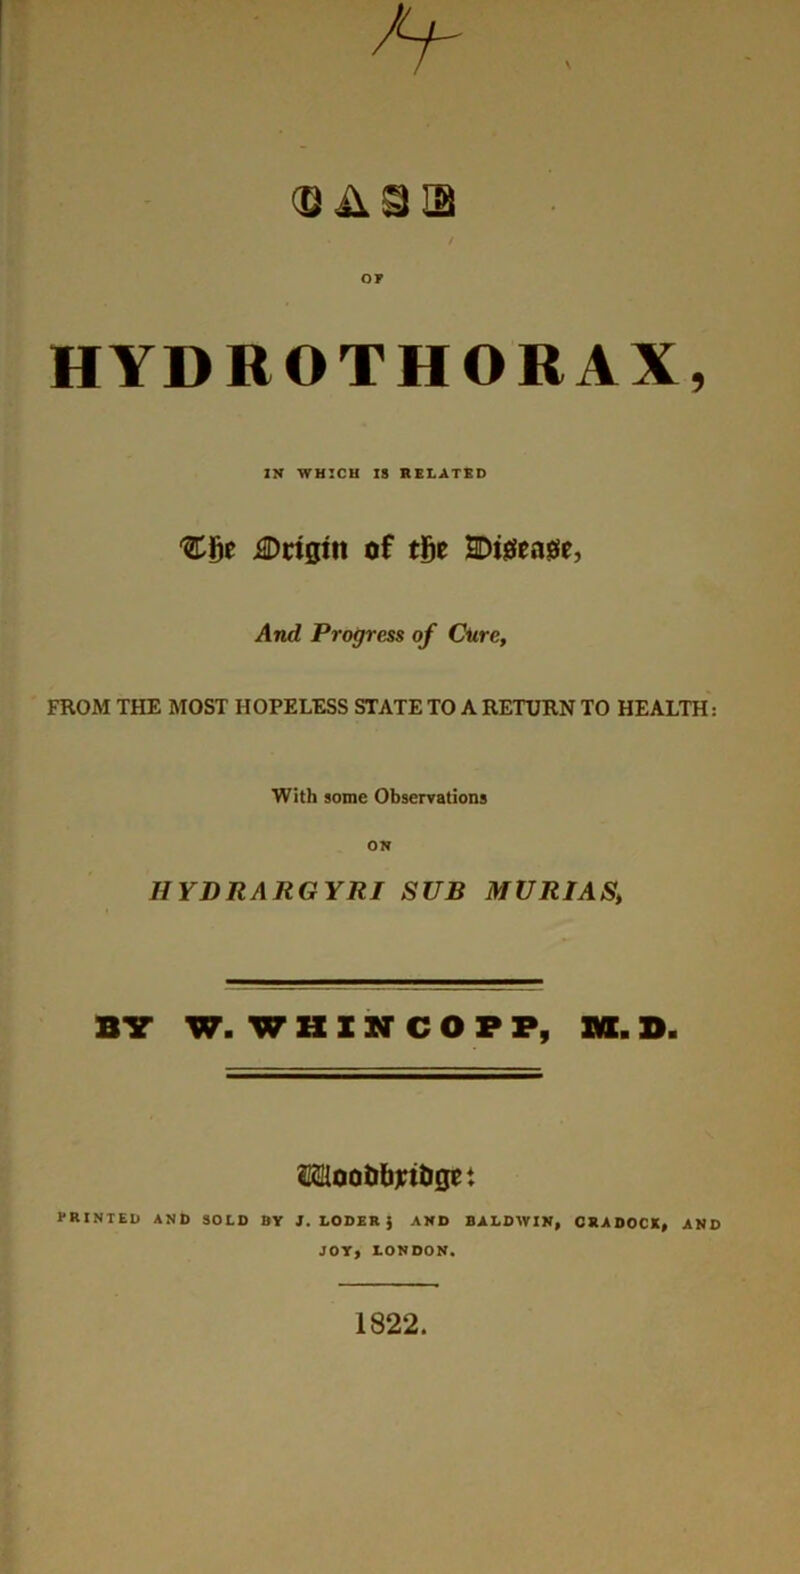 HYDROTHORAX, IN WHICH 18 RELATED 'CBe J®ct0in of tge SDtjSea^e, And Progress of Cure, FROM THE MOST HOPELESS STATE TO A RETURN TO HEALTH: With some Observations ON HYDRARGYRI SUB MURIAS, BV W. W H X N C O P P, m. D. ssliootibritiset PRINTED AND SOLD BY J, LODER ) AND BALDWIN^ ORADOCX^ AND JOY, LONDON. 1822.